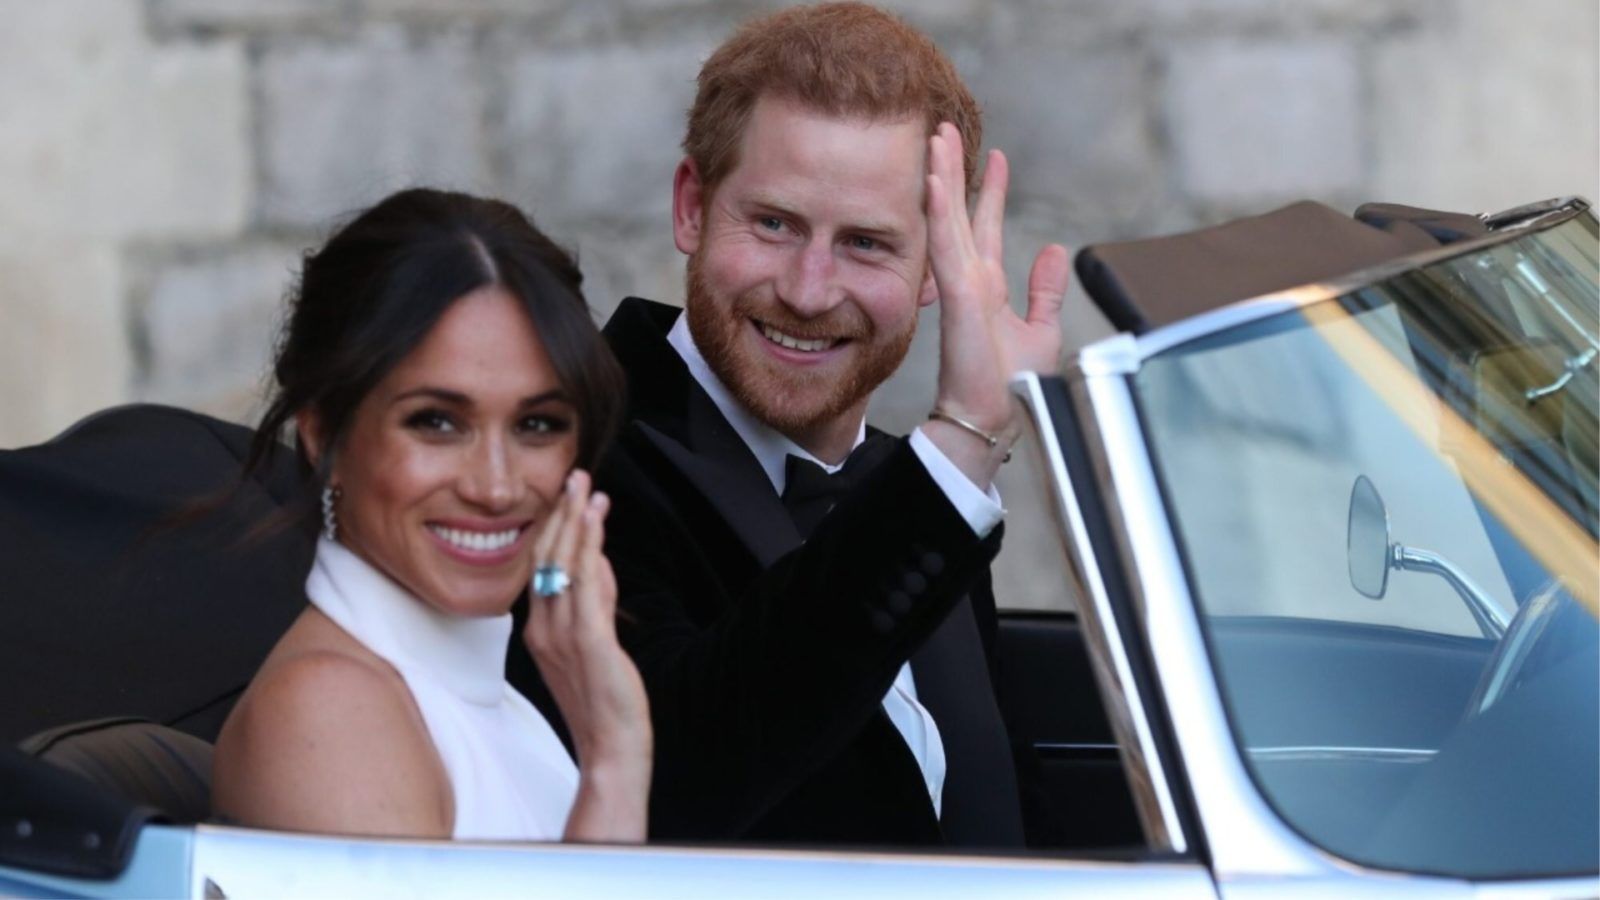 Meghan Markle requested this ’90s hit at her and Prince Harry’s royal wedding